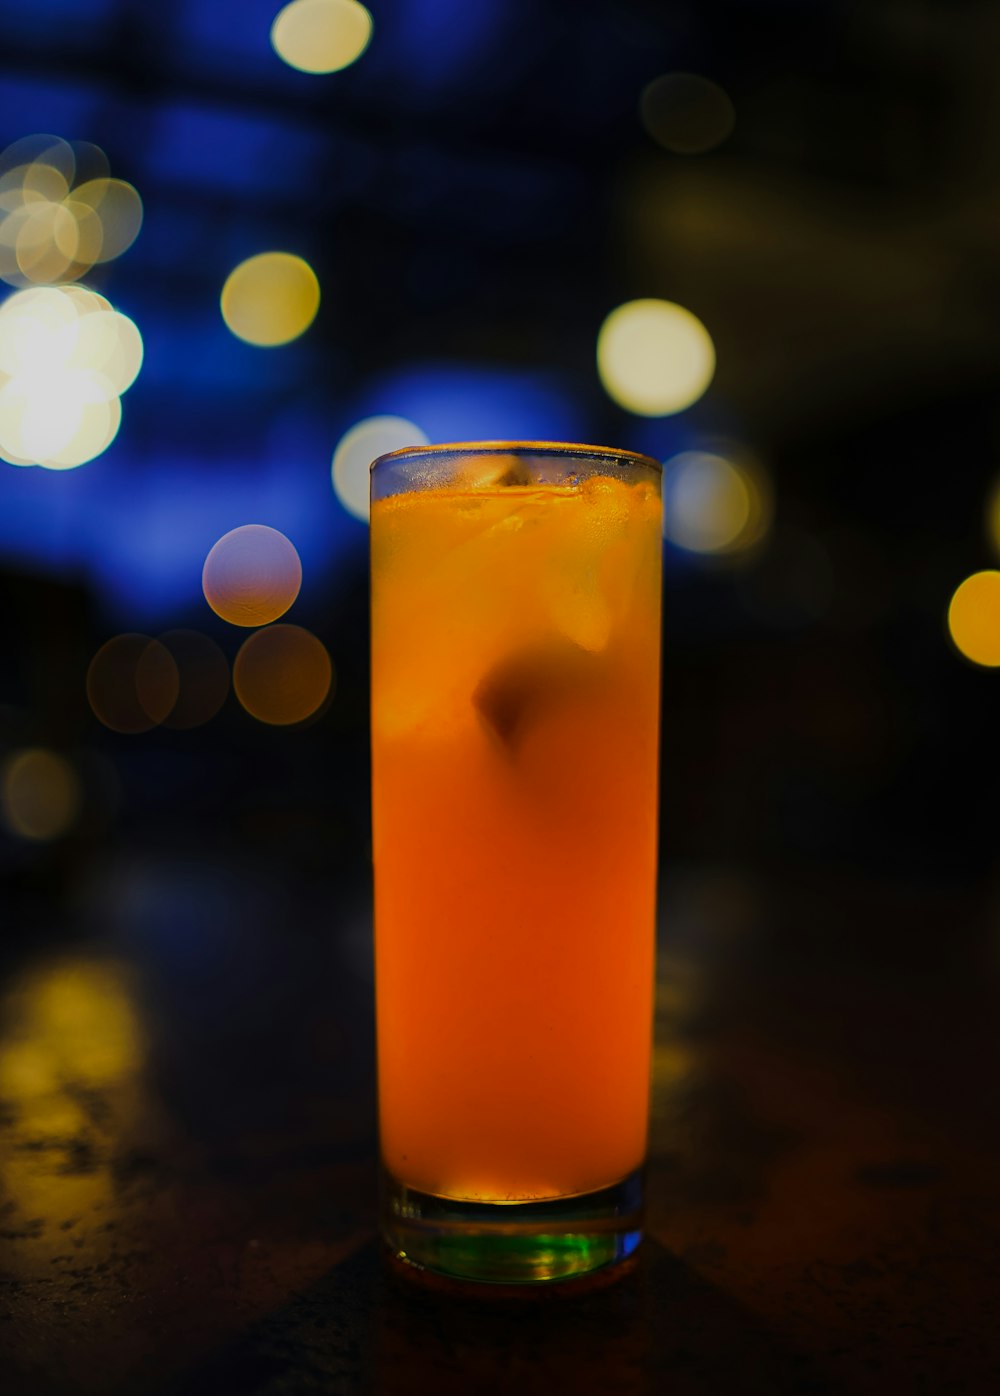 clear drinking glass with orange liquid